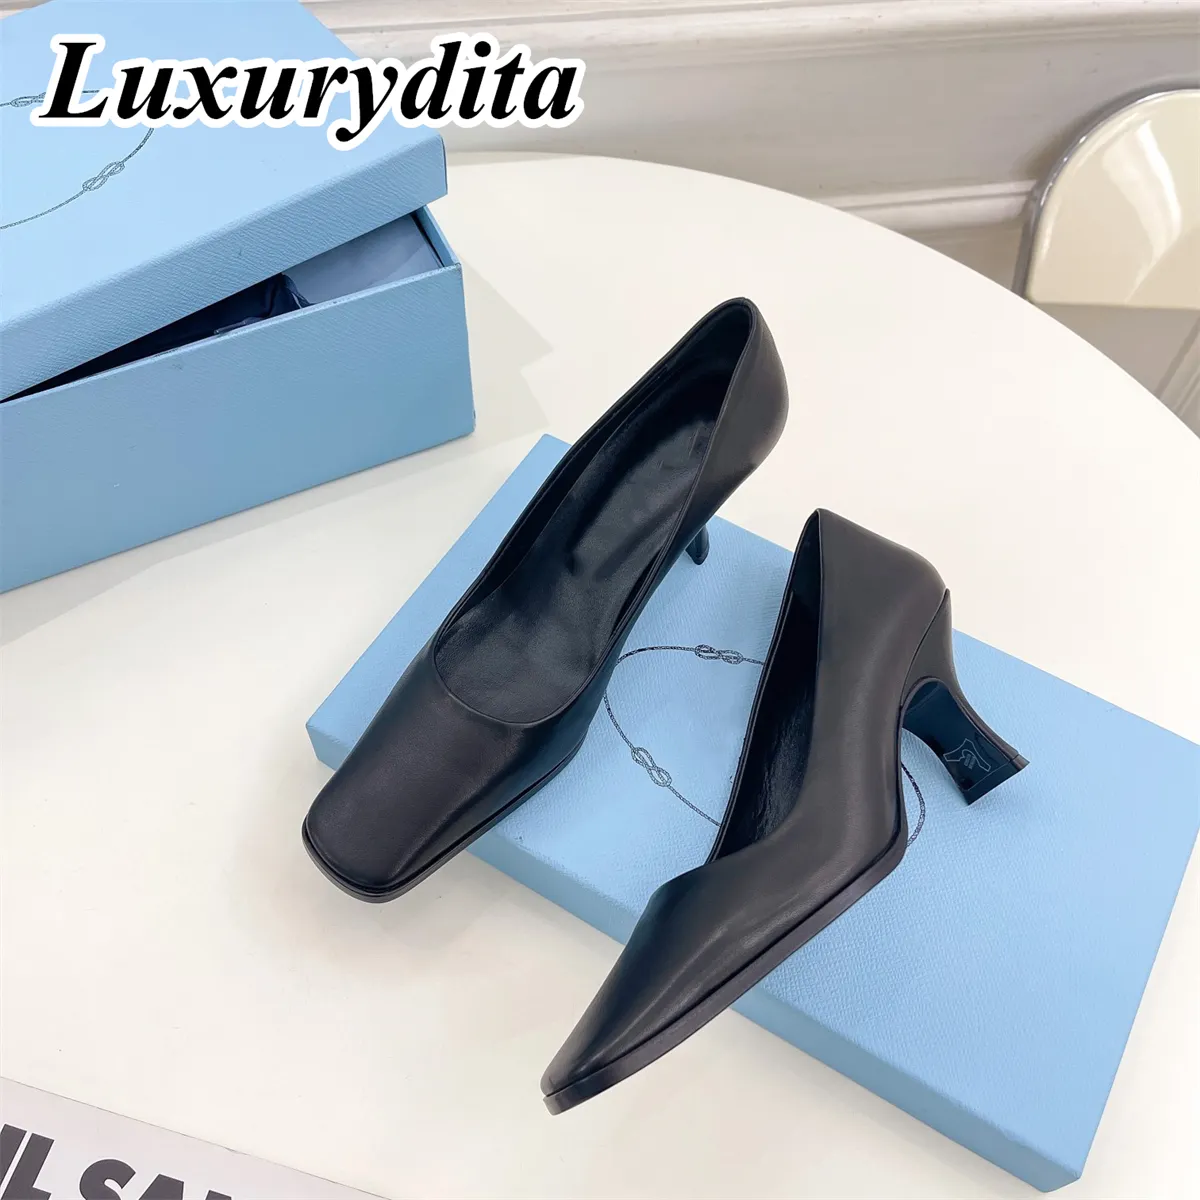 High quality Designer Womens High Heels Luxury Dinner Leather Sandals Fashion Design Casual Muller Shoes Office Girl Bar Shoes for ladys triangle heel YMPR 0055